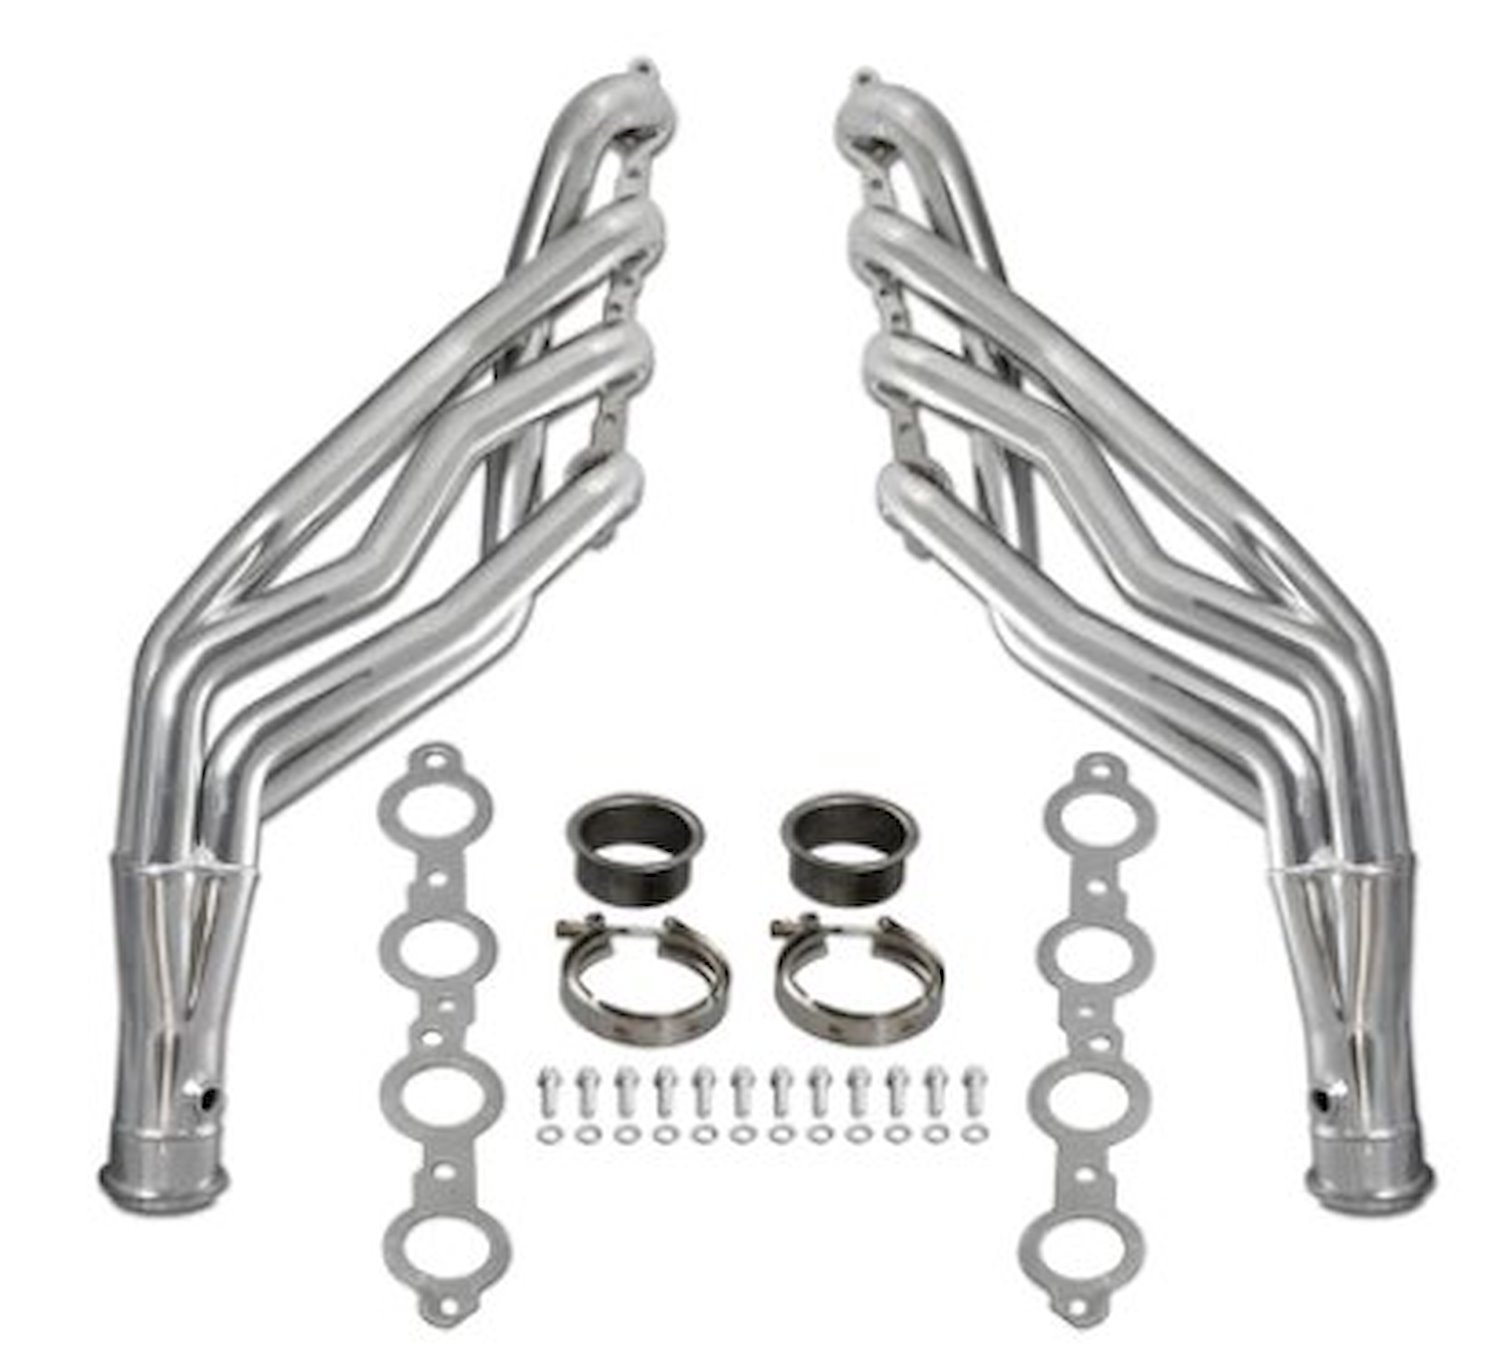 LS Engine Swap Long Tube Headers for 1963-1972 Chevy C10, GMC C-15 Pickup Trucks 2WD [Silver]